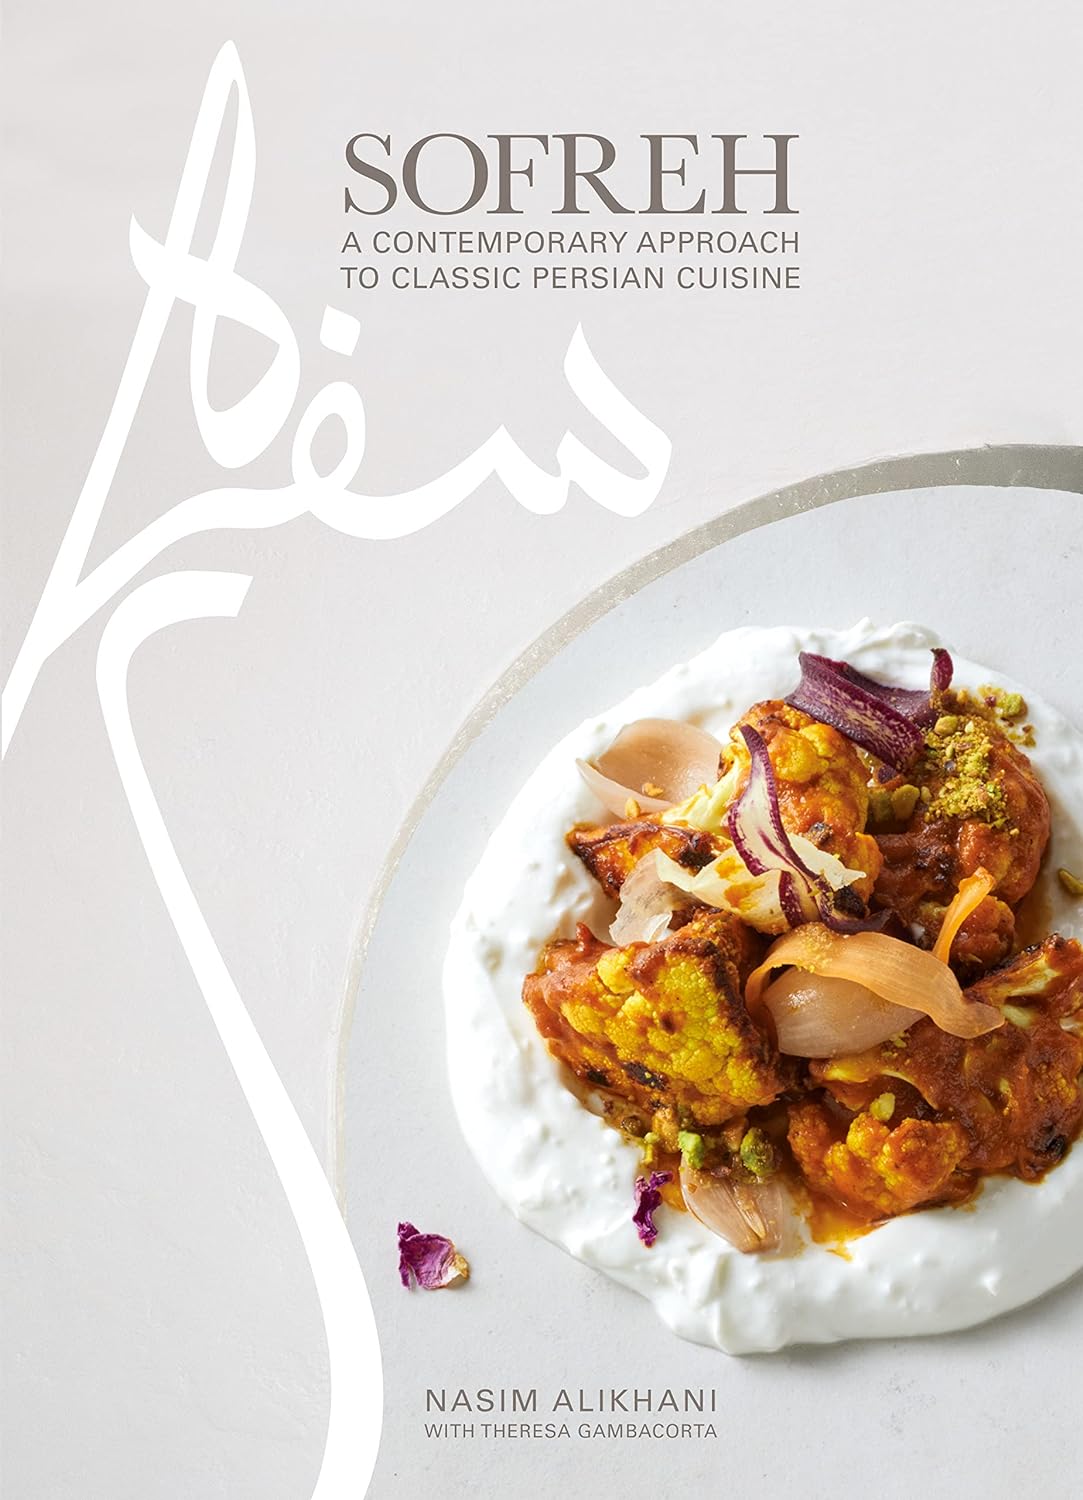 Sofreh: A Contemporary Approach to Classic Persian Cuisine: A Cookbook (Nasim Alikhani, Theresa Gambacorta)